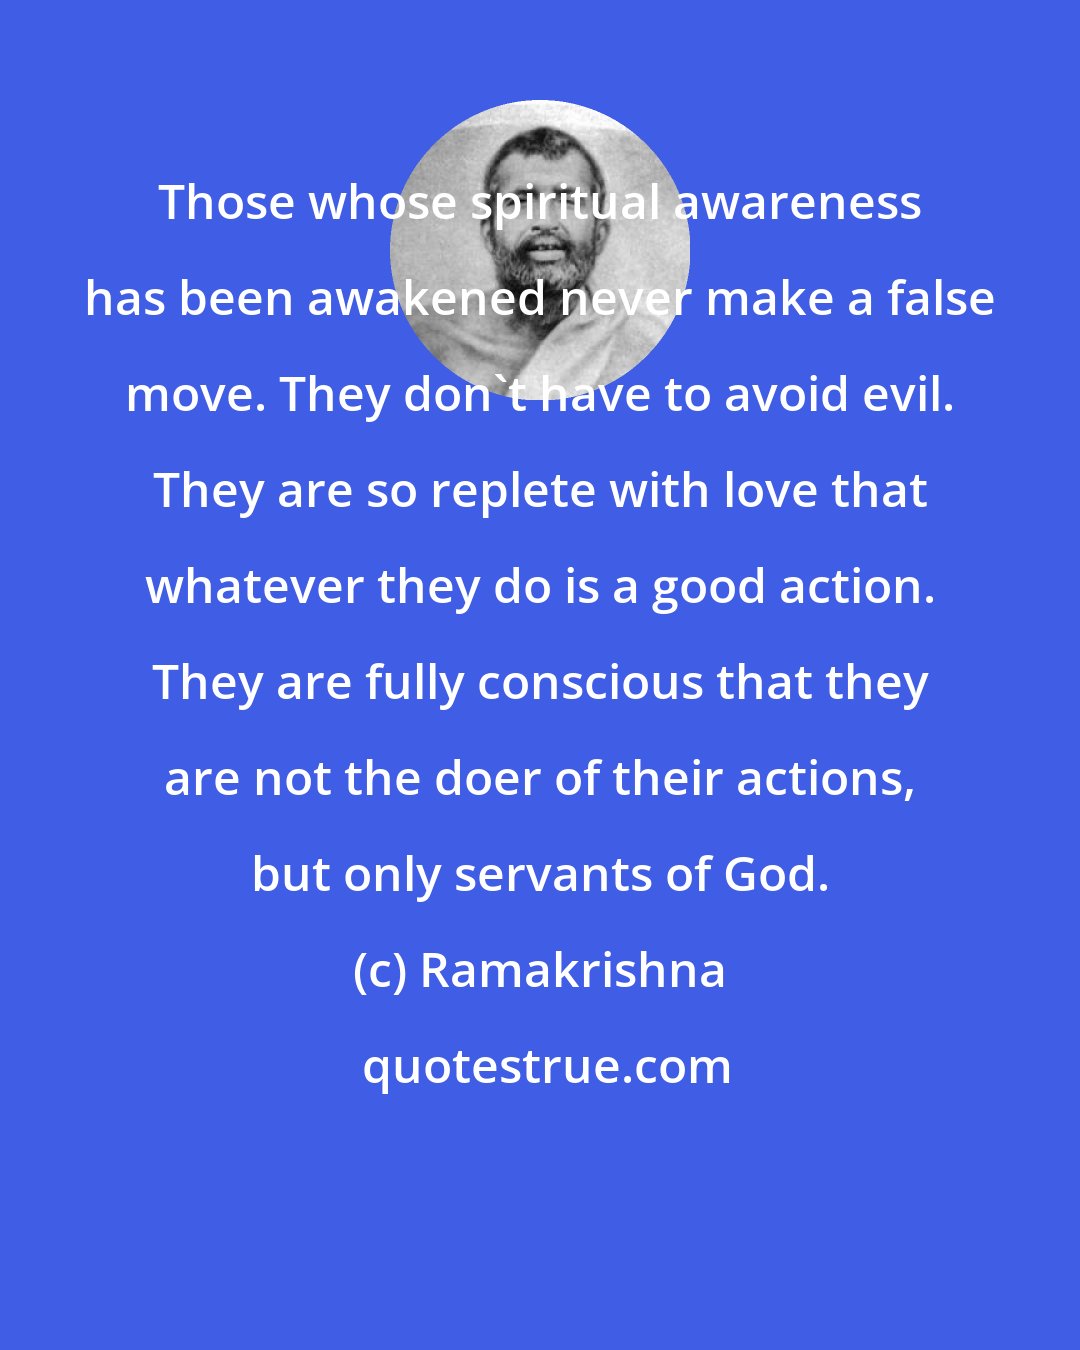 Ramakrishna: Those whose spiritual awareness has been awakened never make a false move. They don't have to avoid evil. They are so replete with love that whatever they do is a good action. They are fully conscious that they are not the doer of their actions, but only servants of God.